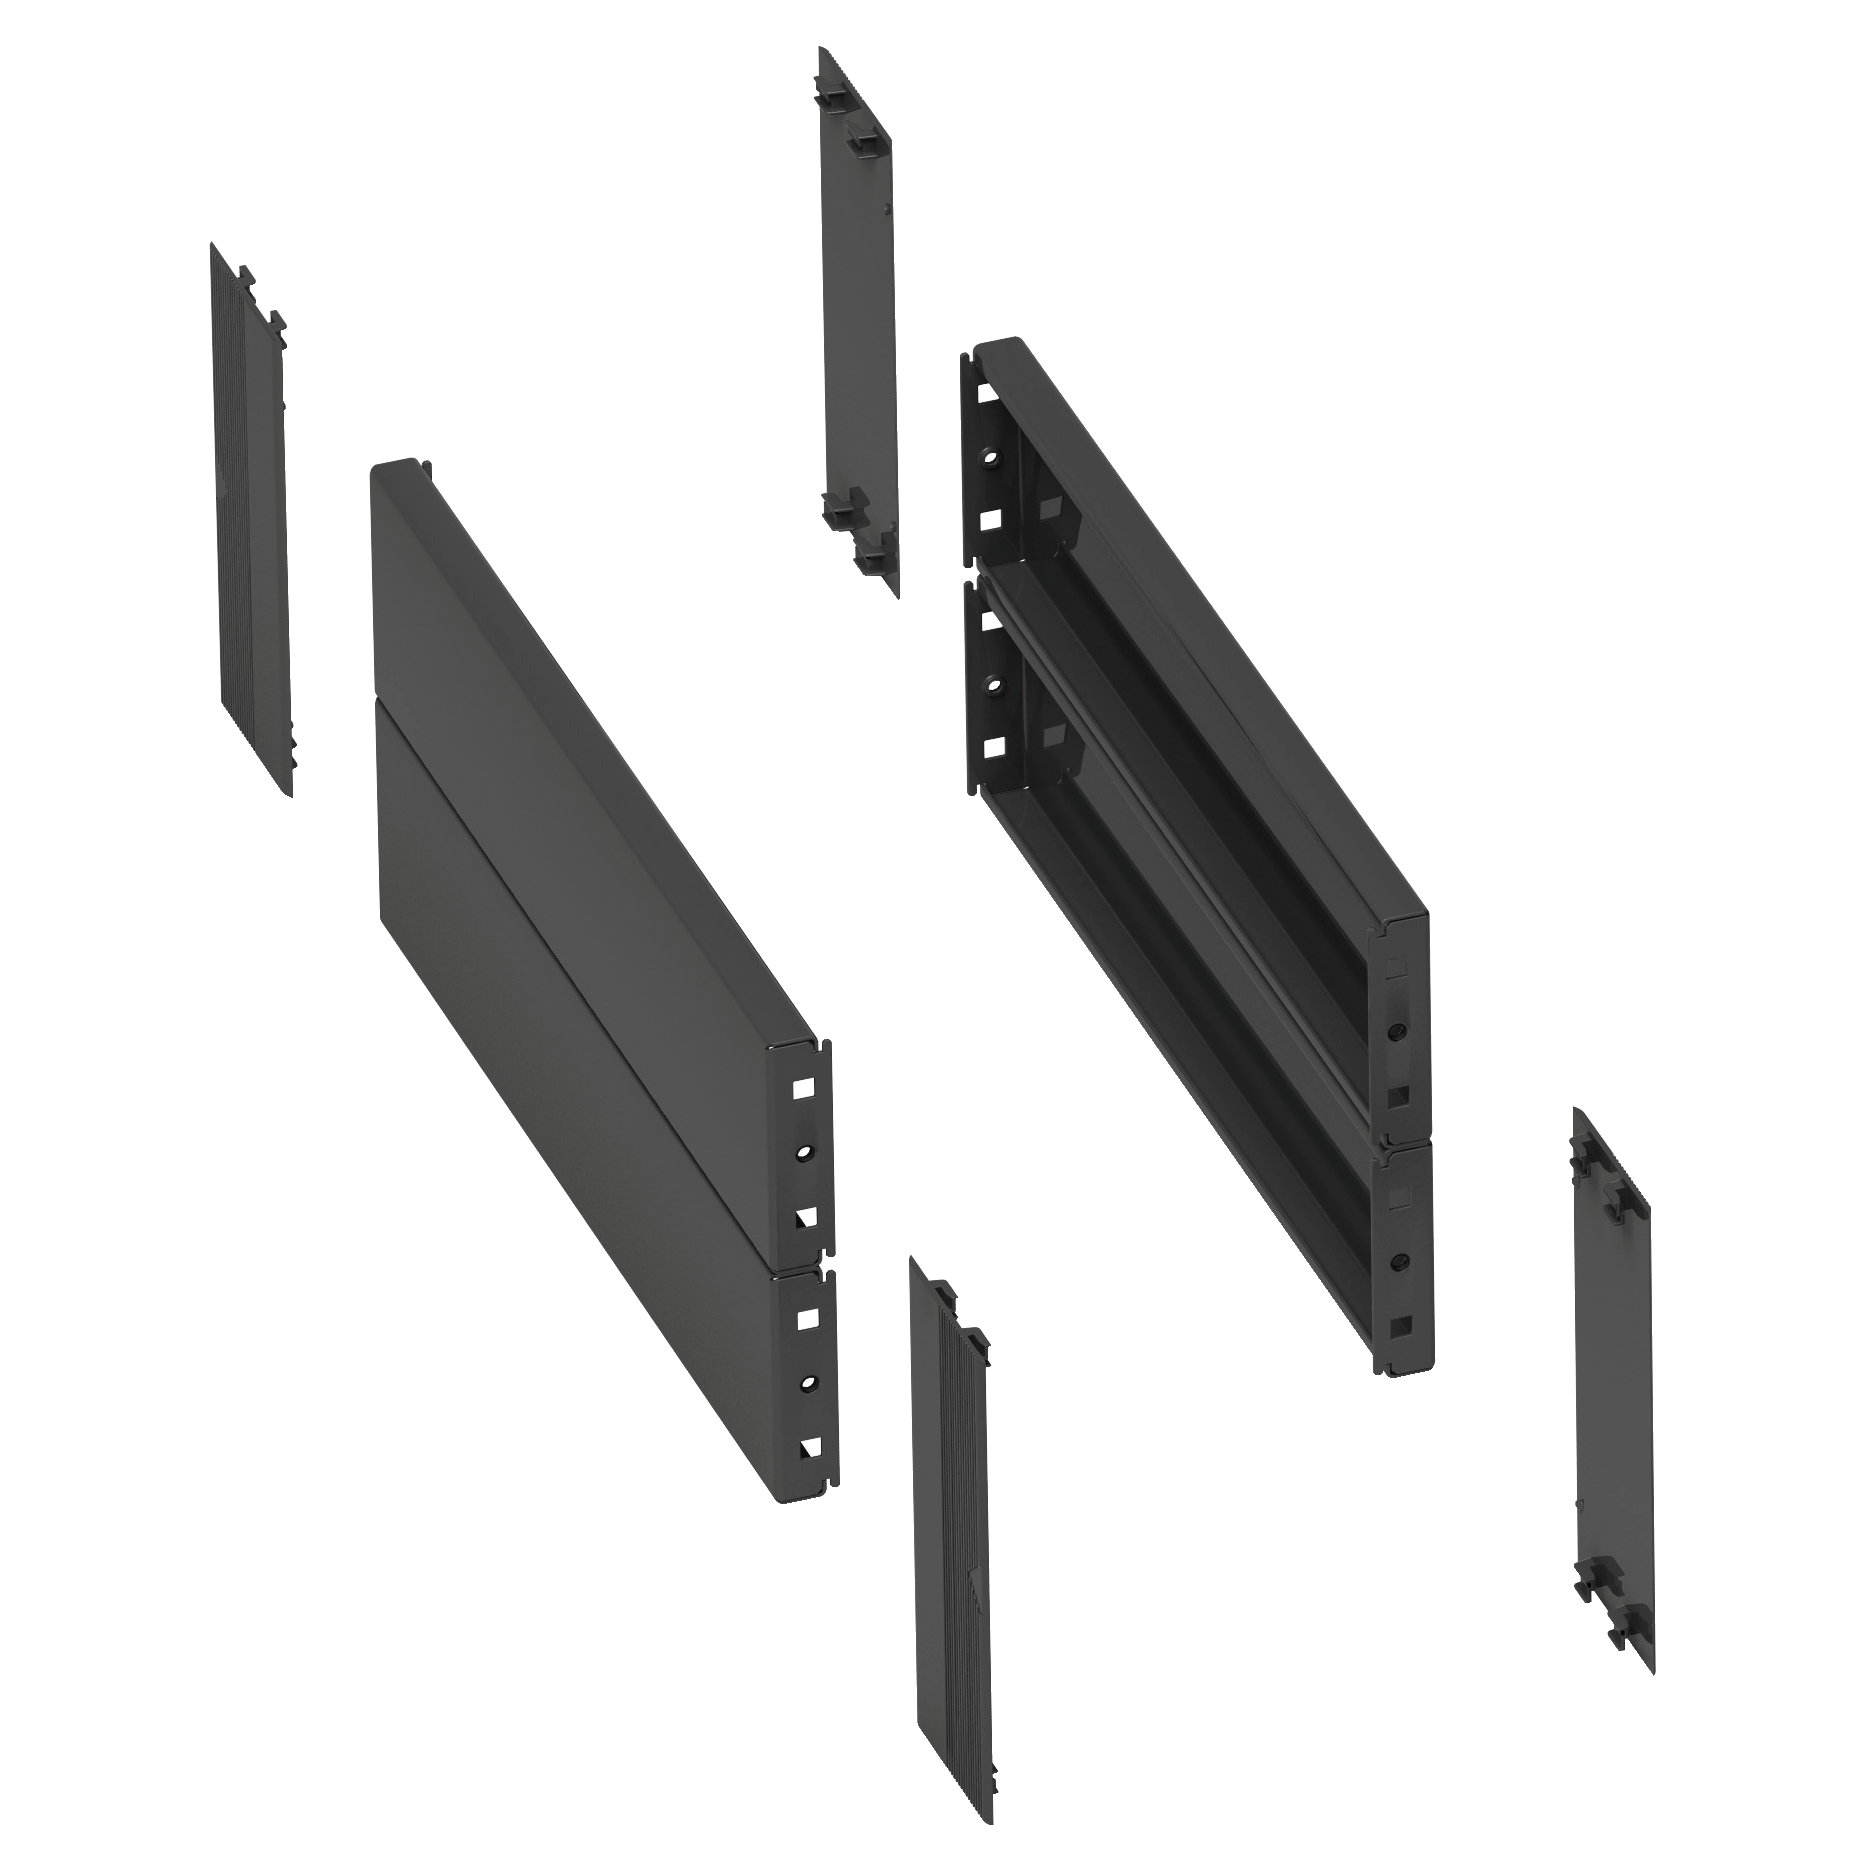 Side panels for the plinth, PanelSeT SFN, Spacial SF, for electrical enclosure  D800mm, set of 4, H200mm